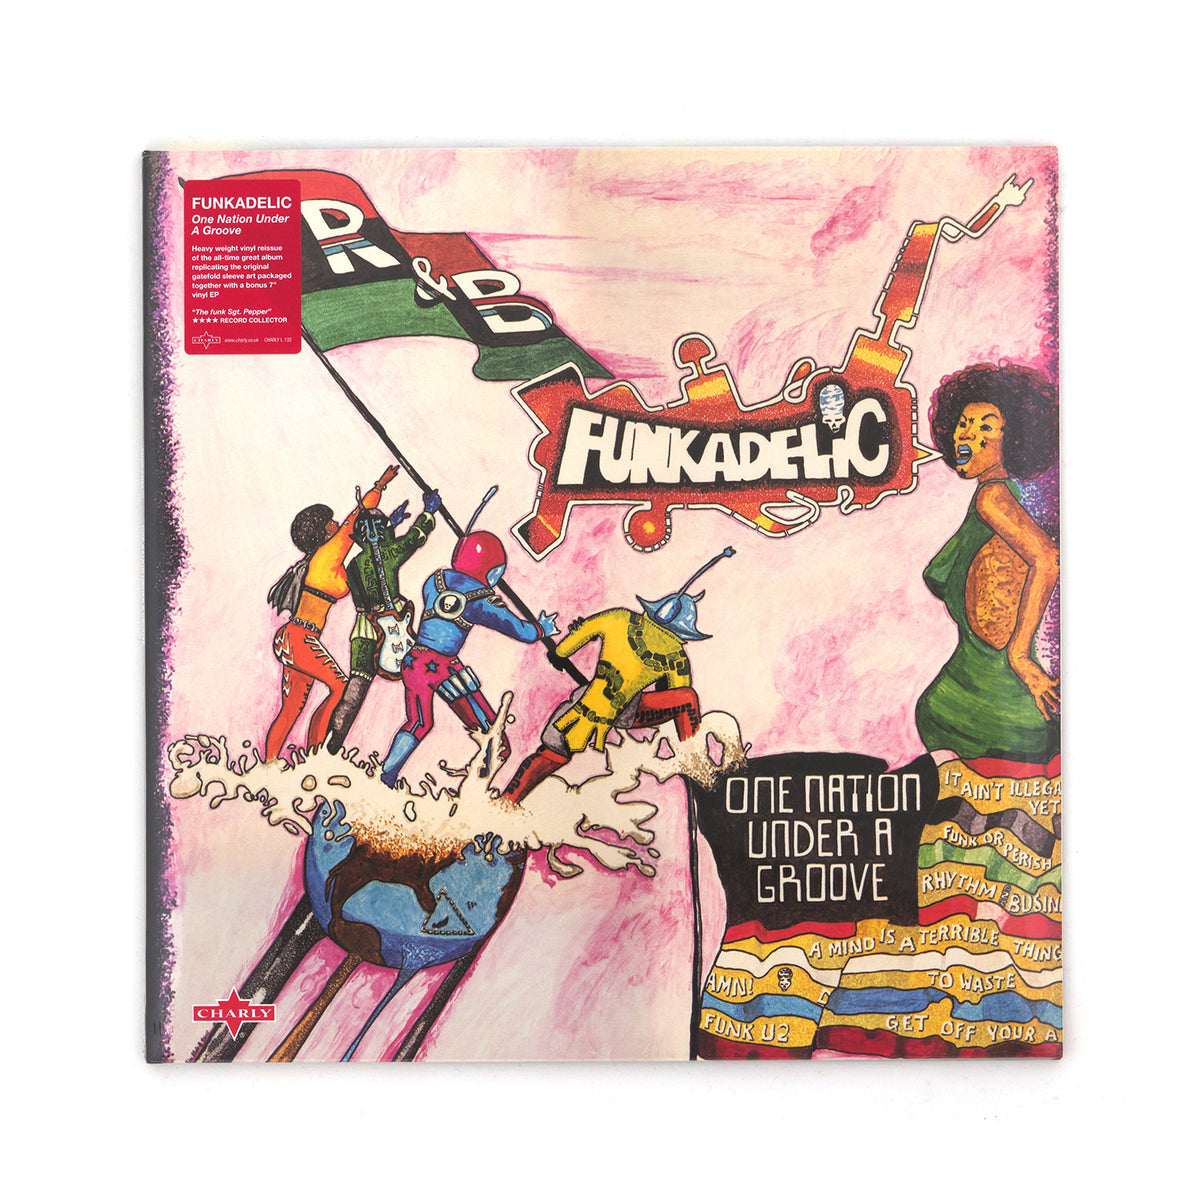 Funkadelic - One Nation Under A Groove LP+7'' - Concrete